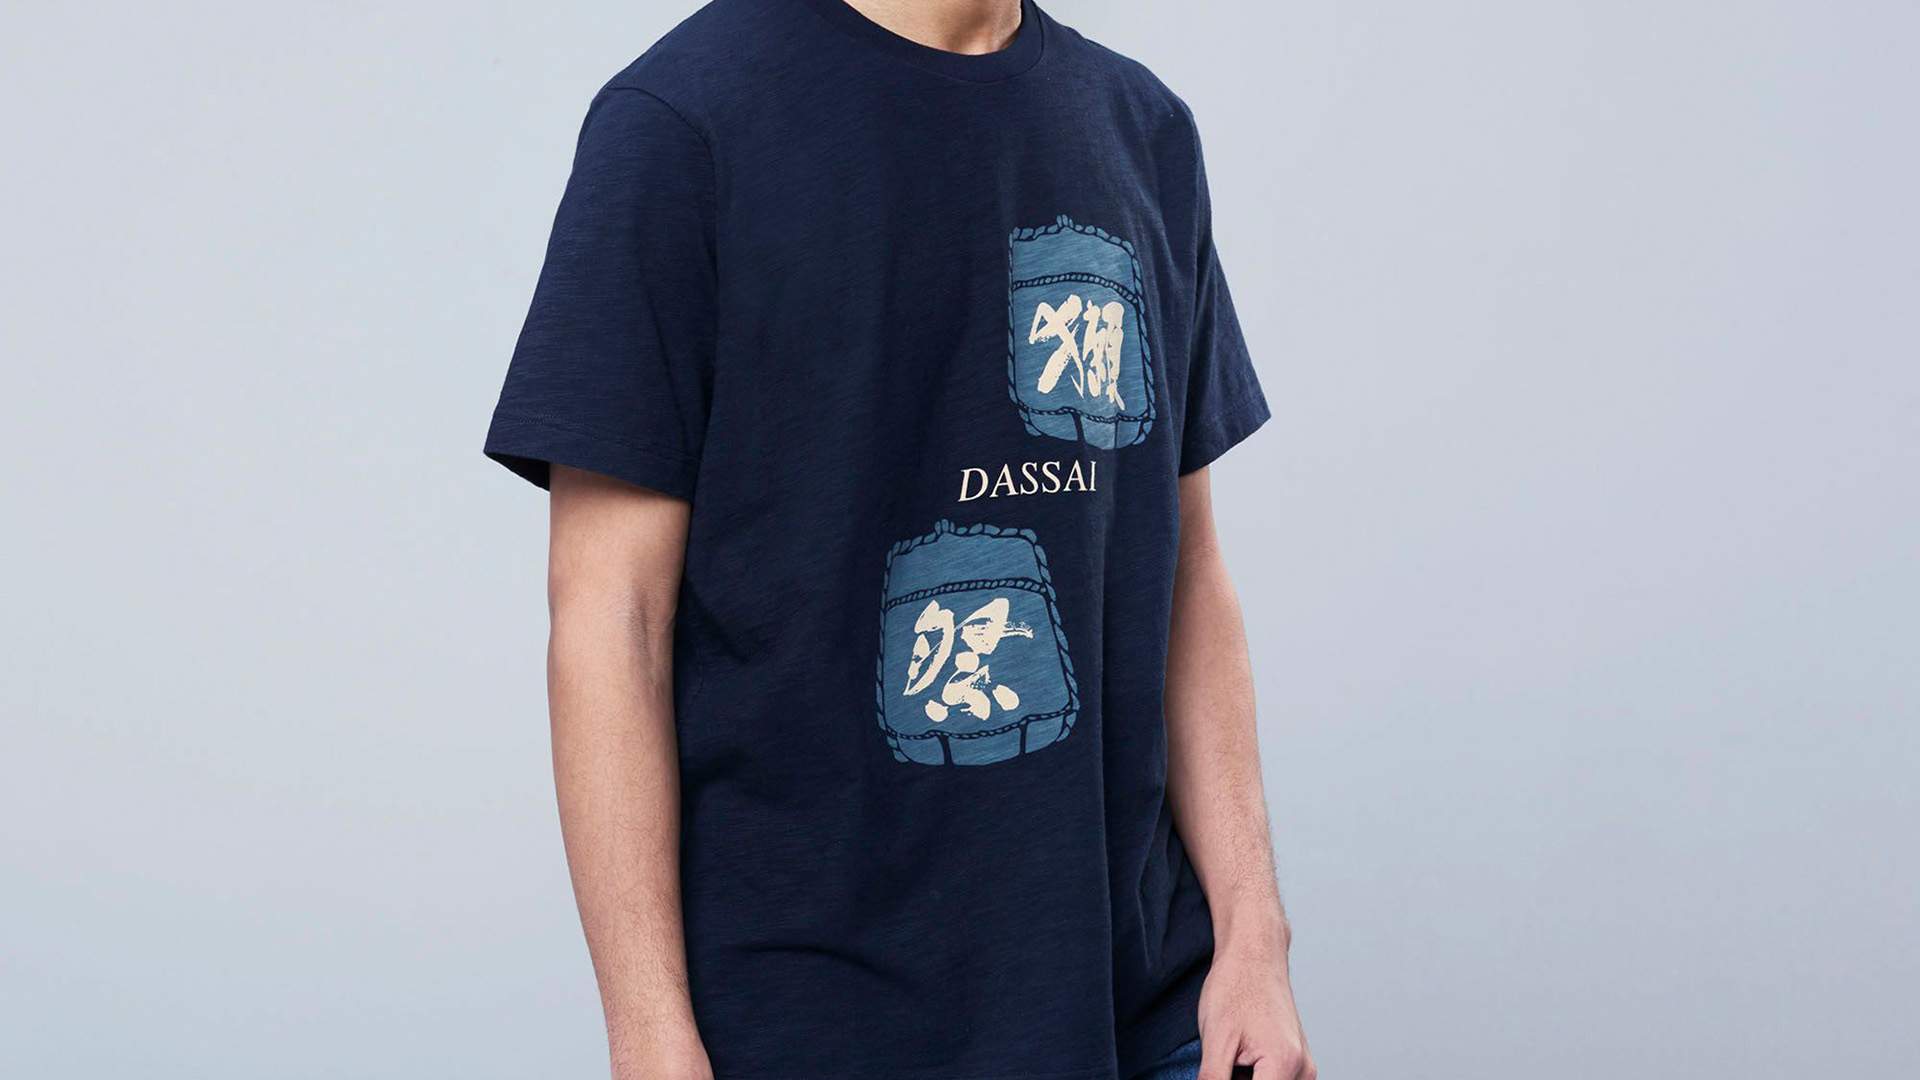 Uniqlo Has Just Released a Bunch of T-Shirts Dedicated to Japan's Best Sake Breweries